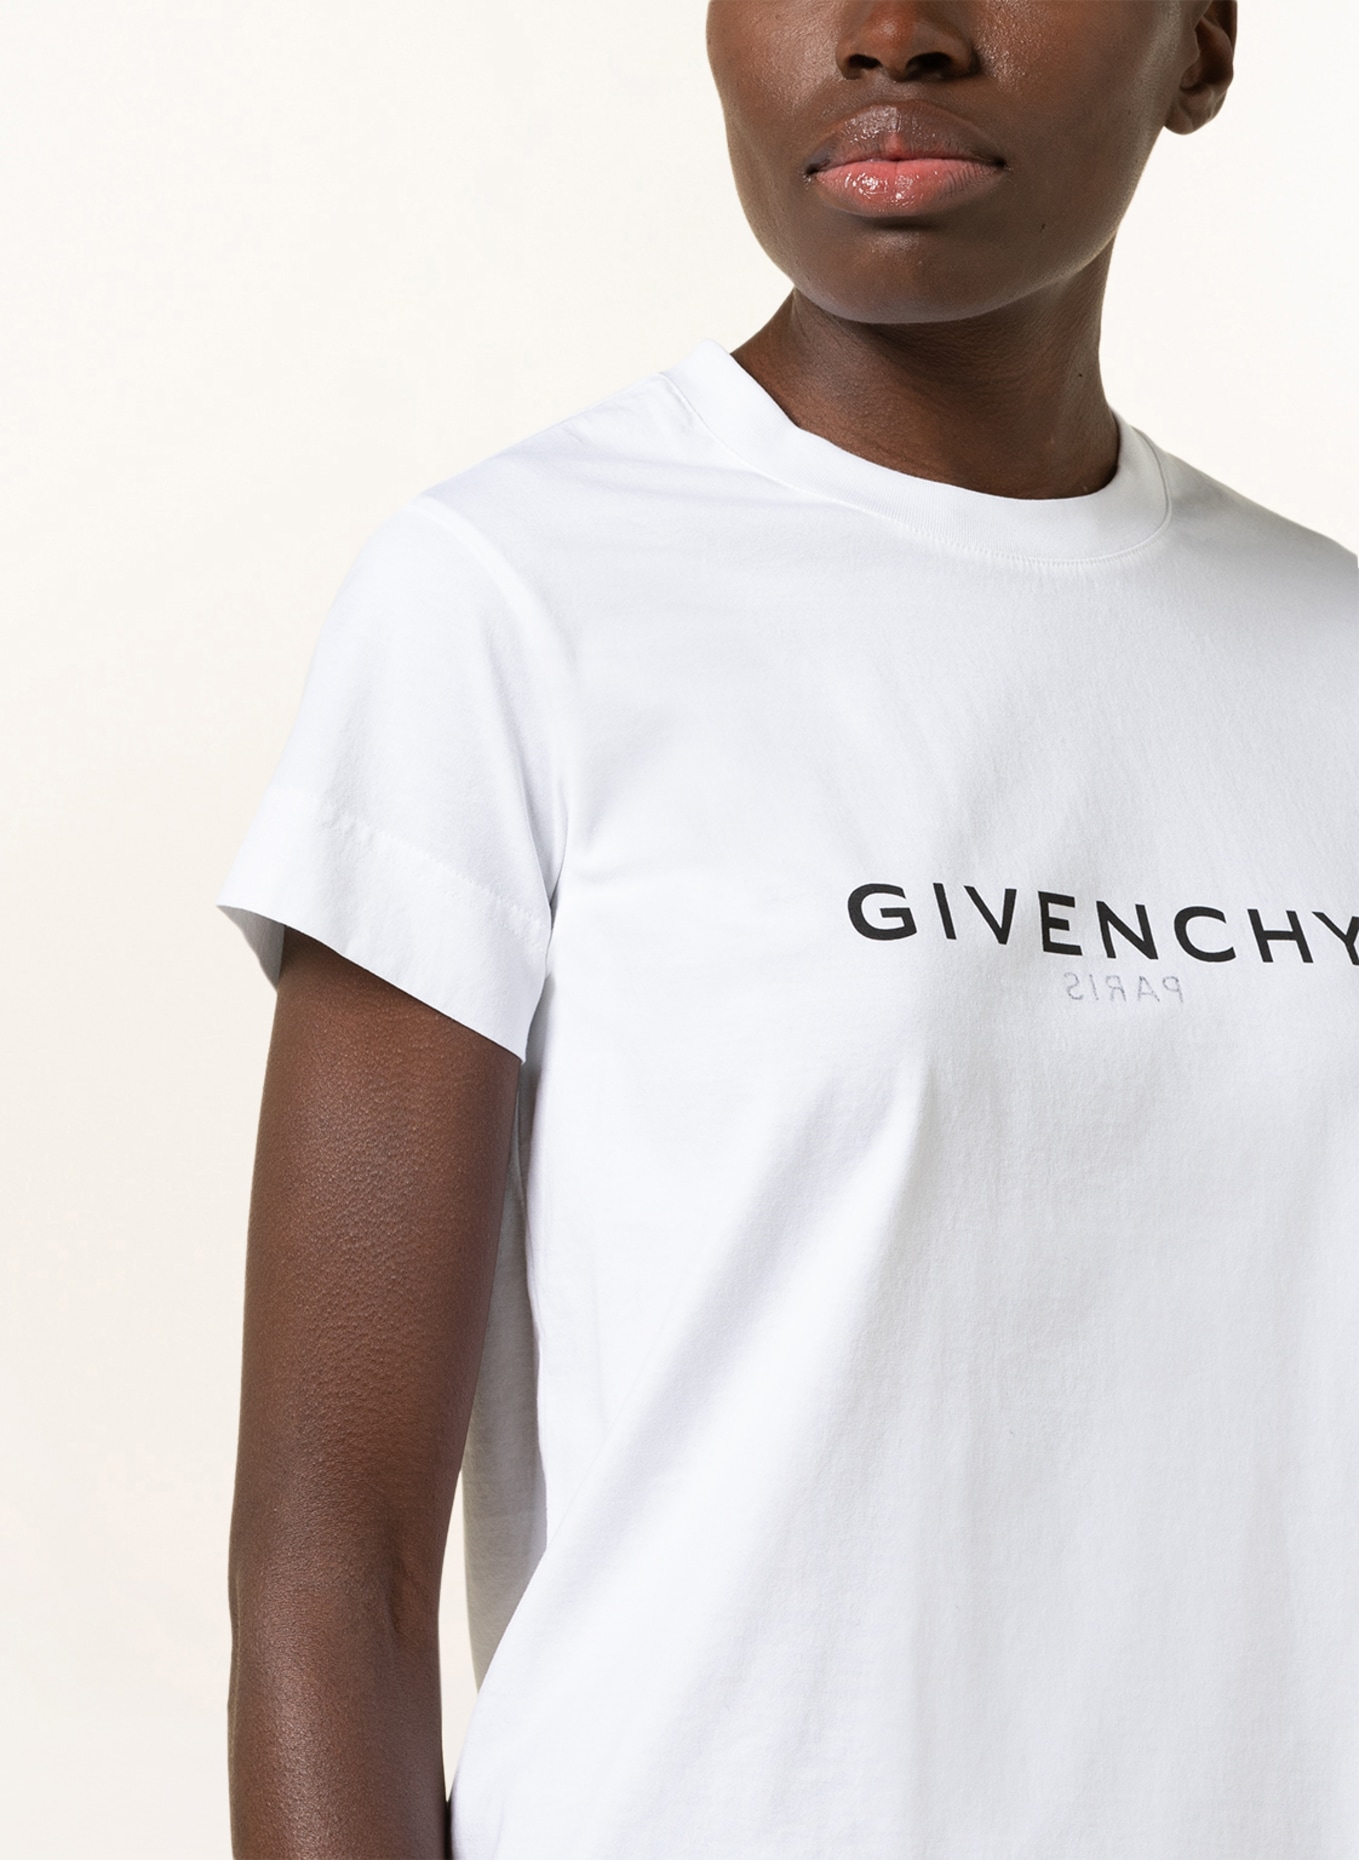 GIVENCHY T-Shirt, Farbe: WEISS (Bild 4)